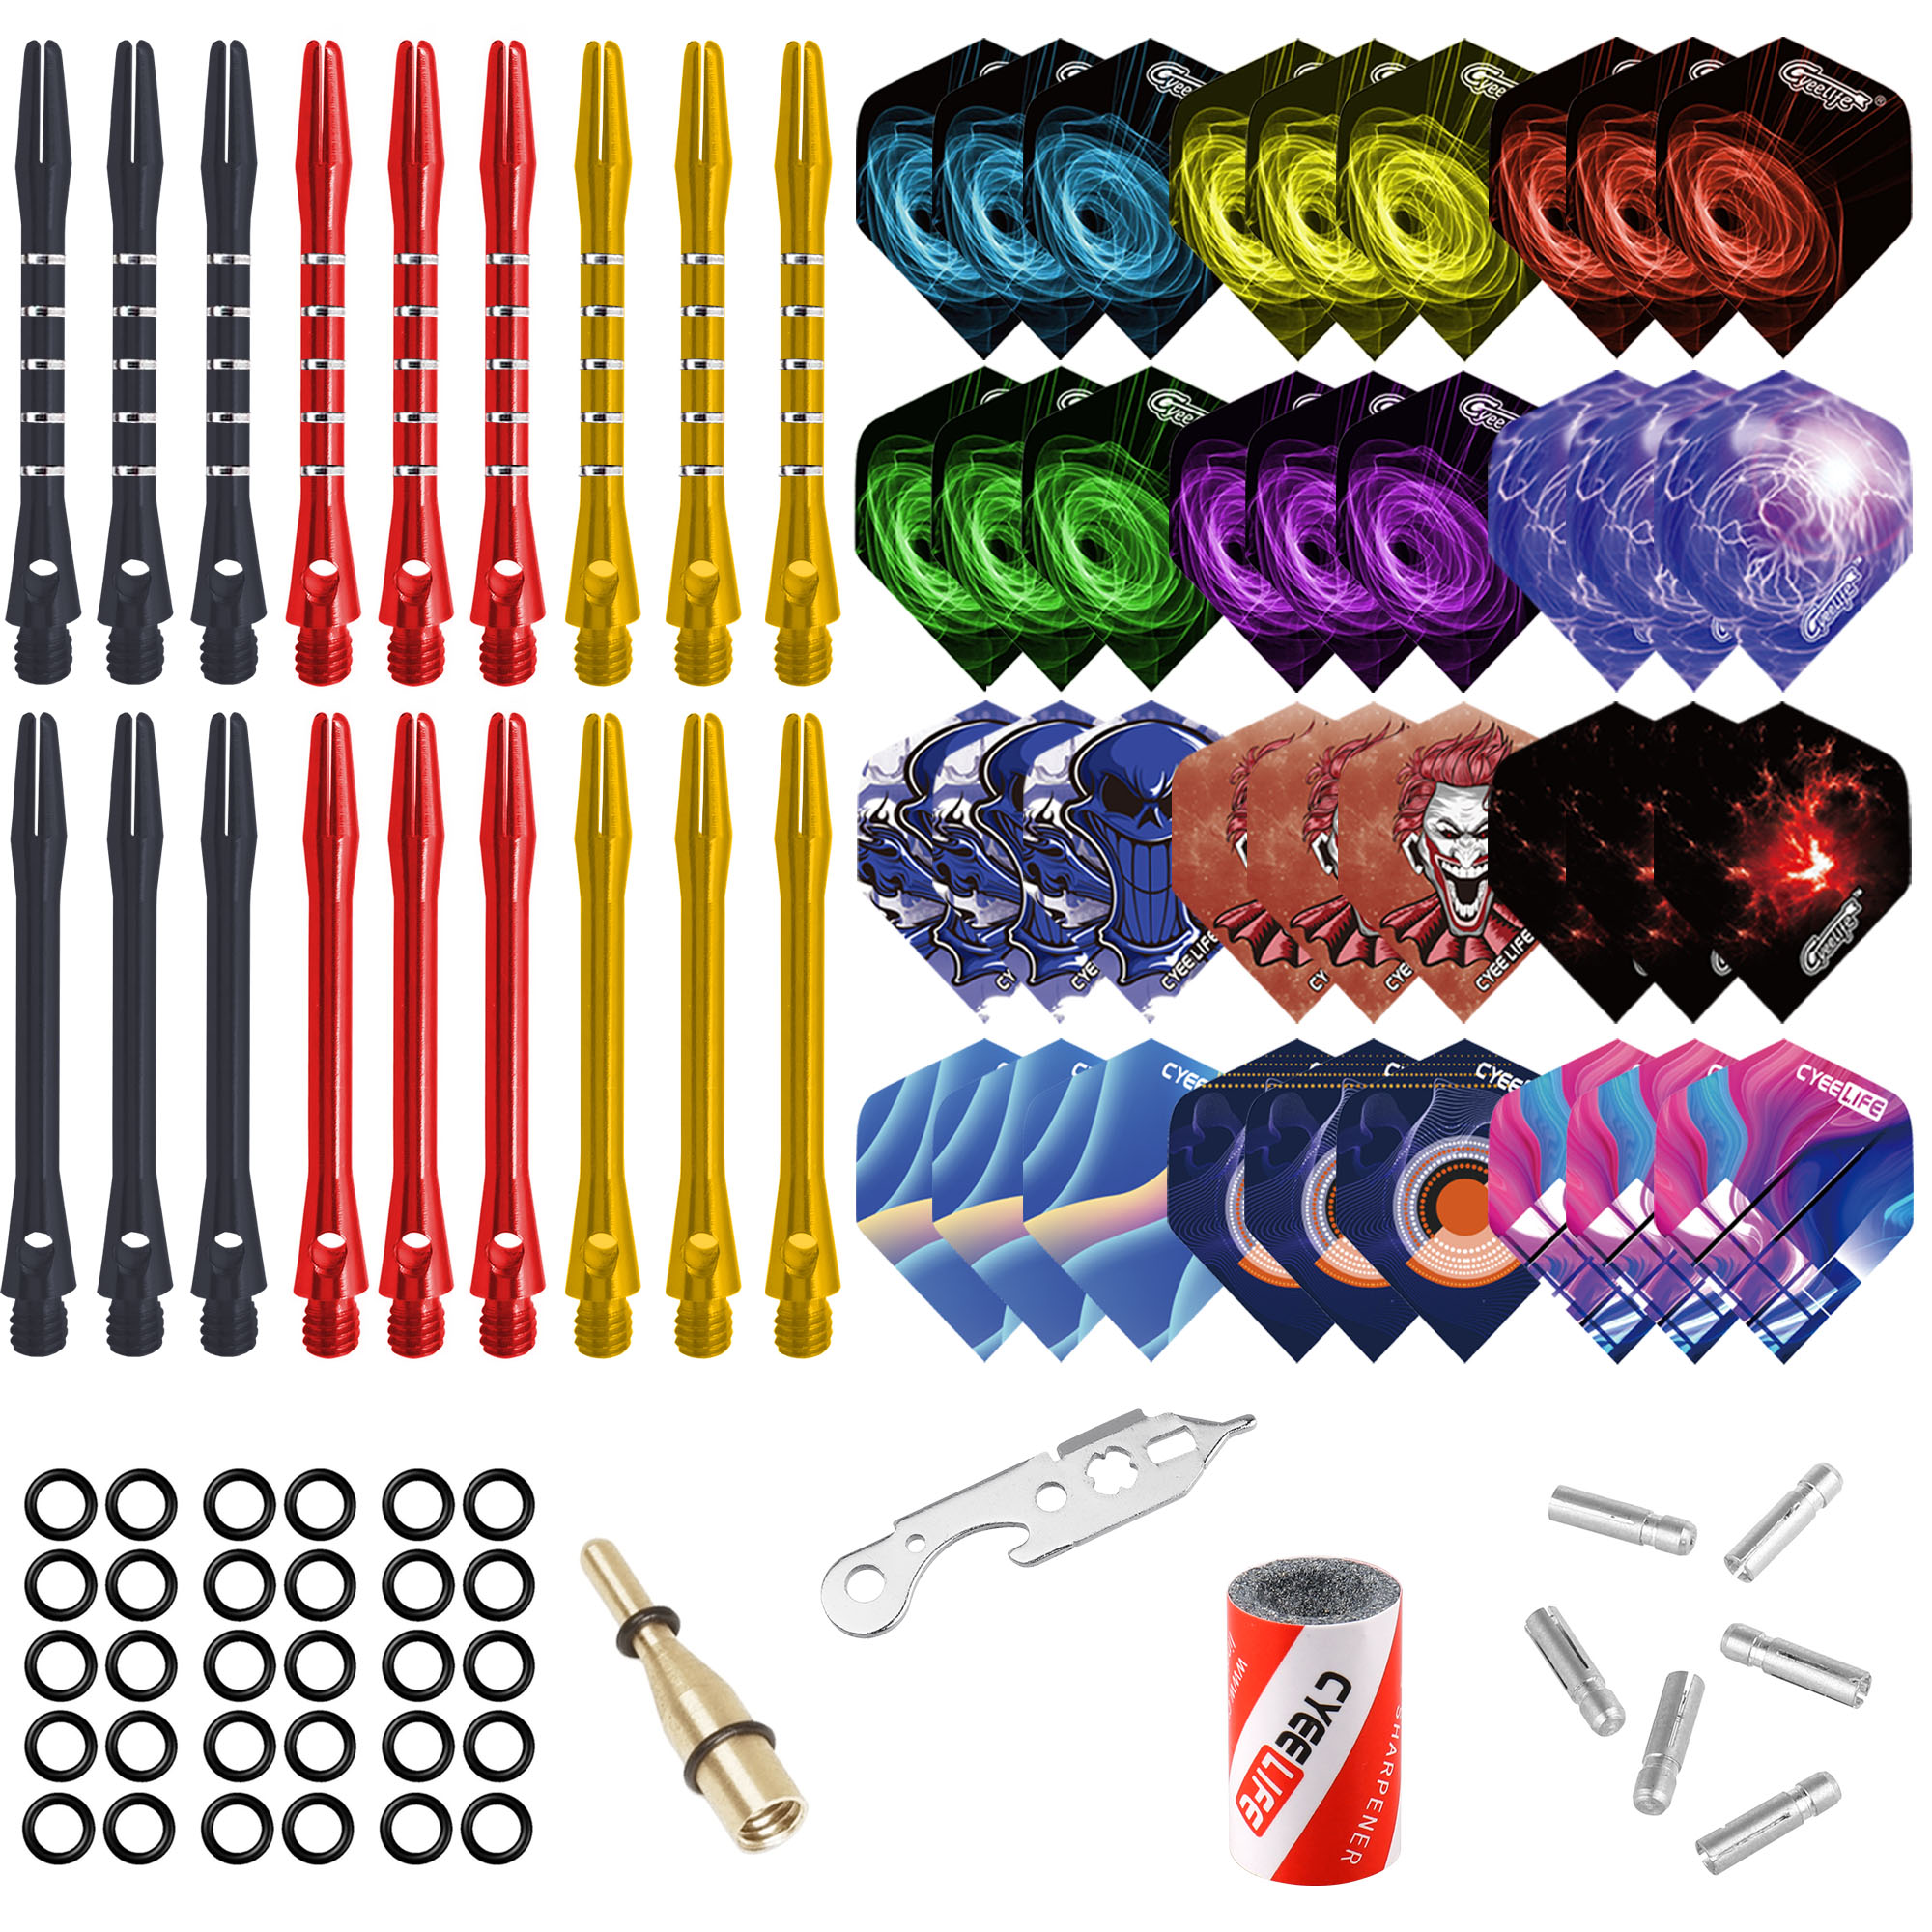 Details about   30Packs Aluminum Dart shafts+100Rubbers Rings+Tool-CyeeLife 